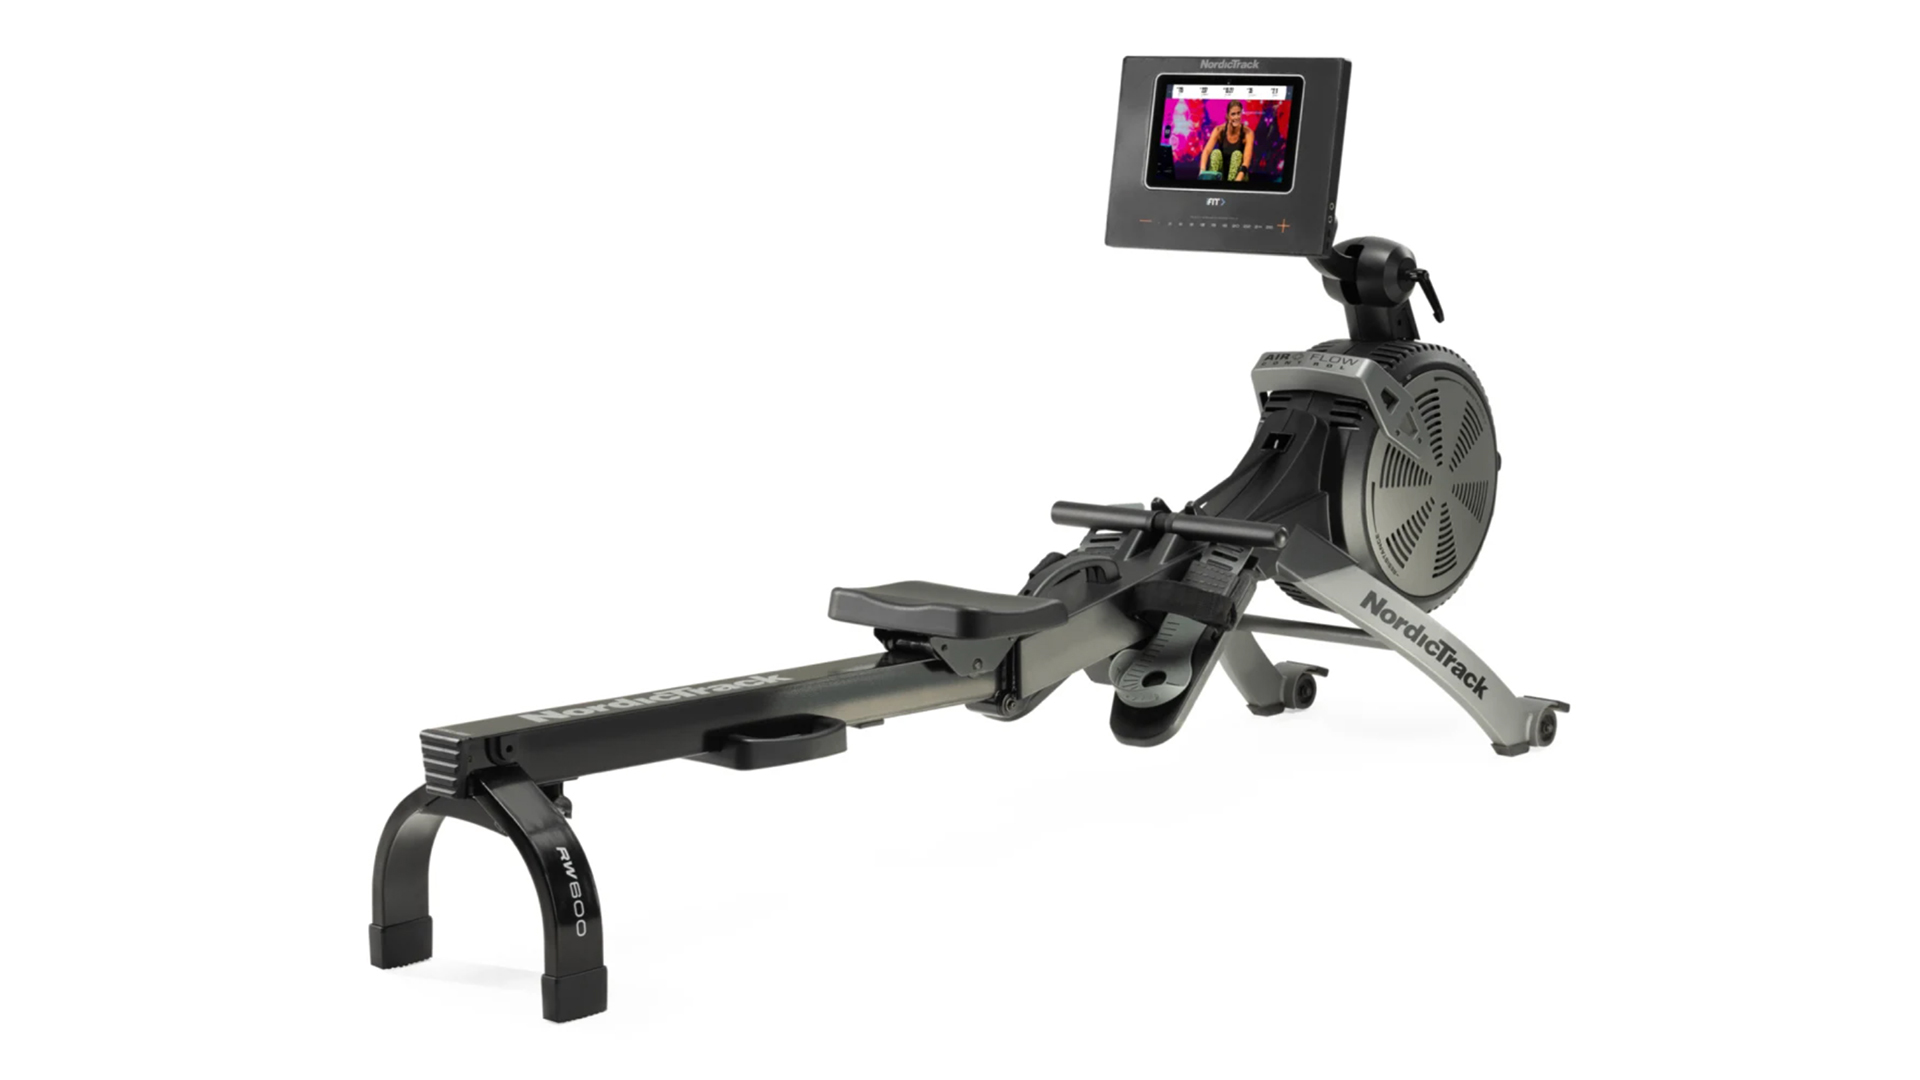 Rowing machine on sale: Product image of NordicTrack